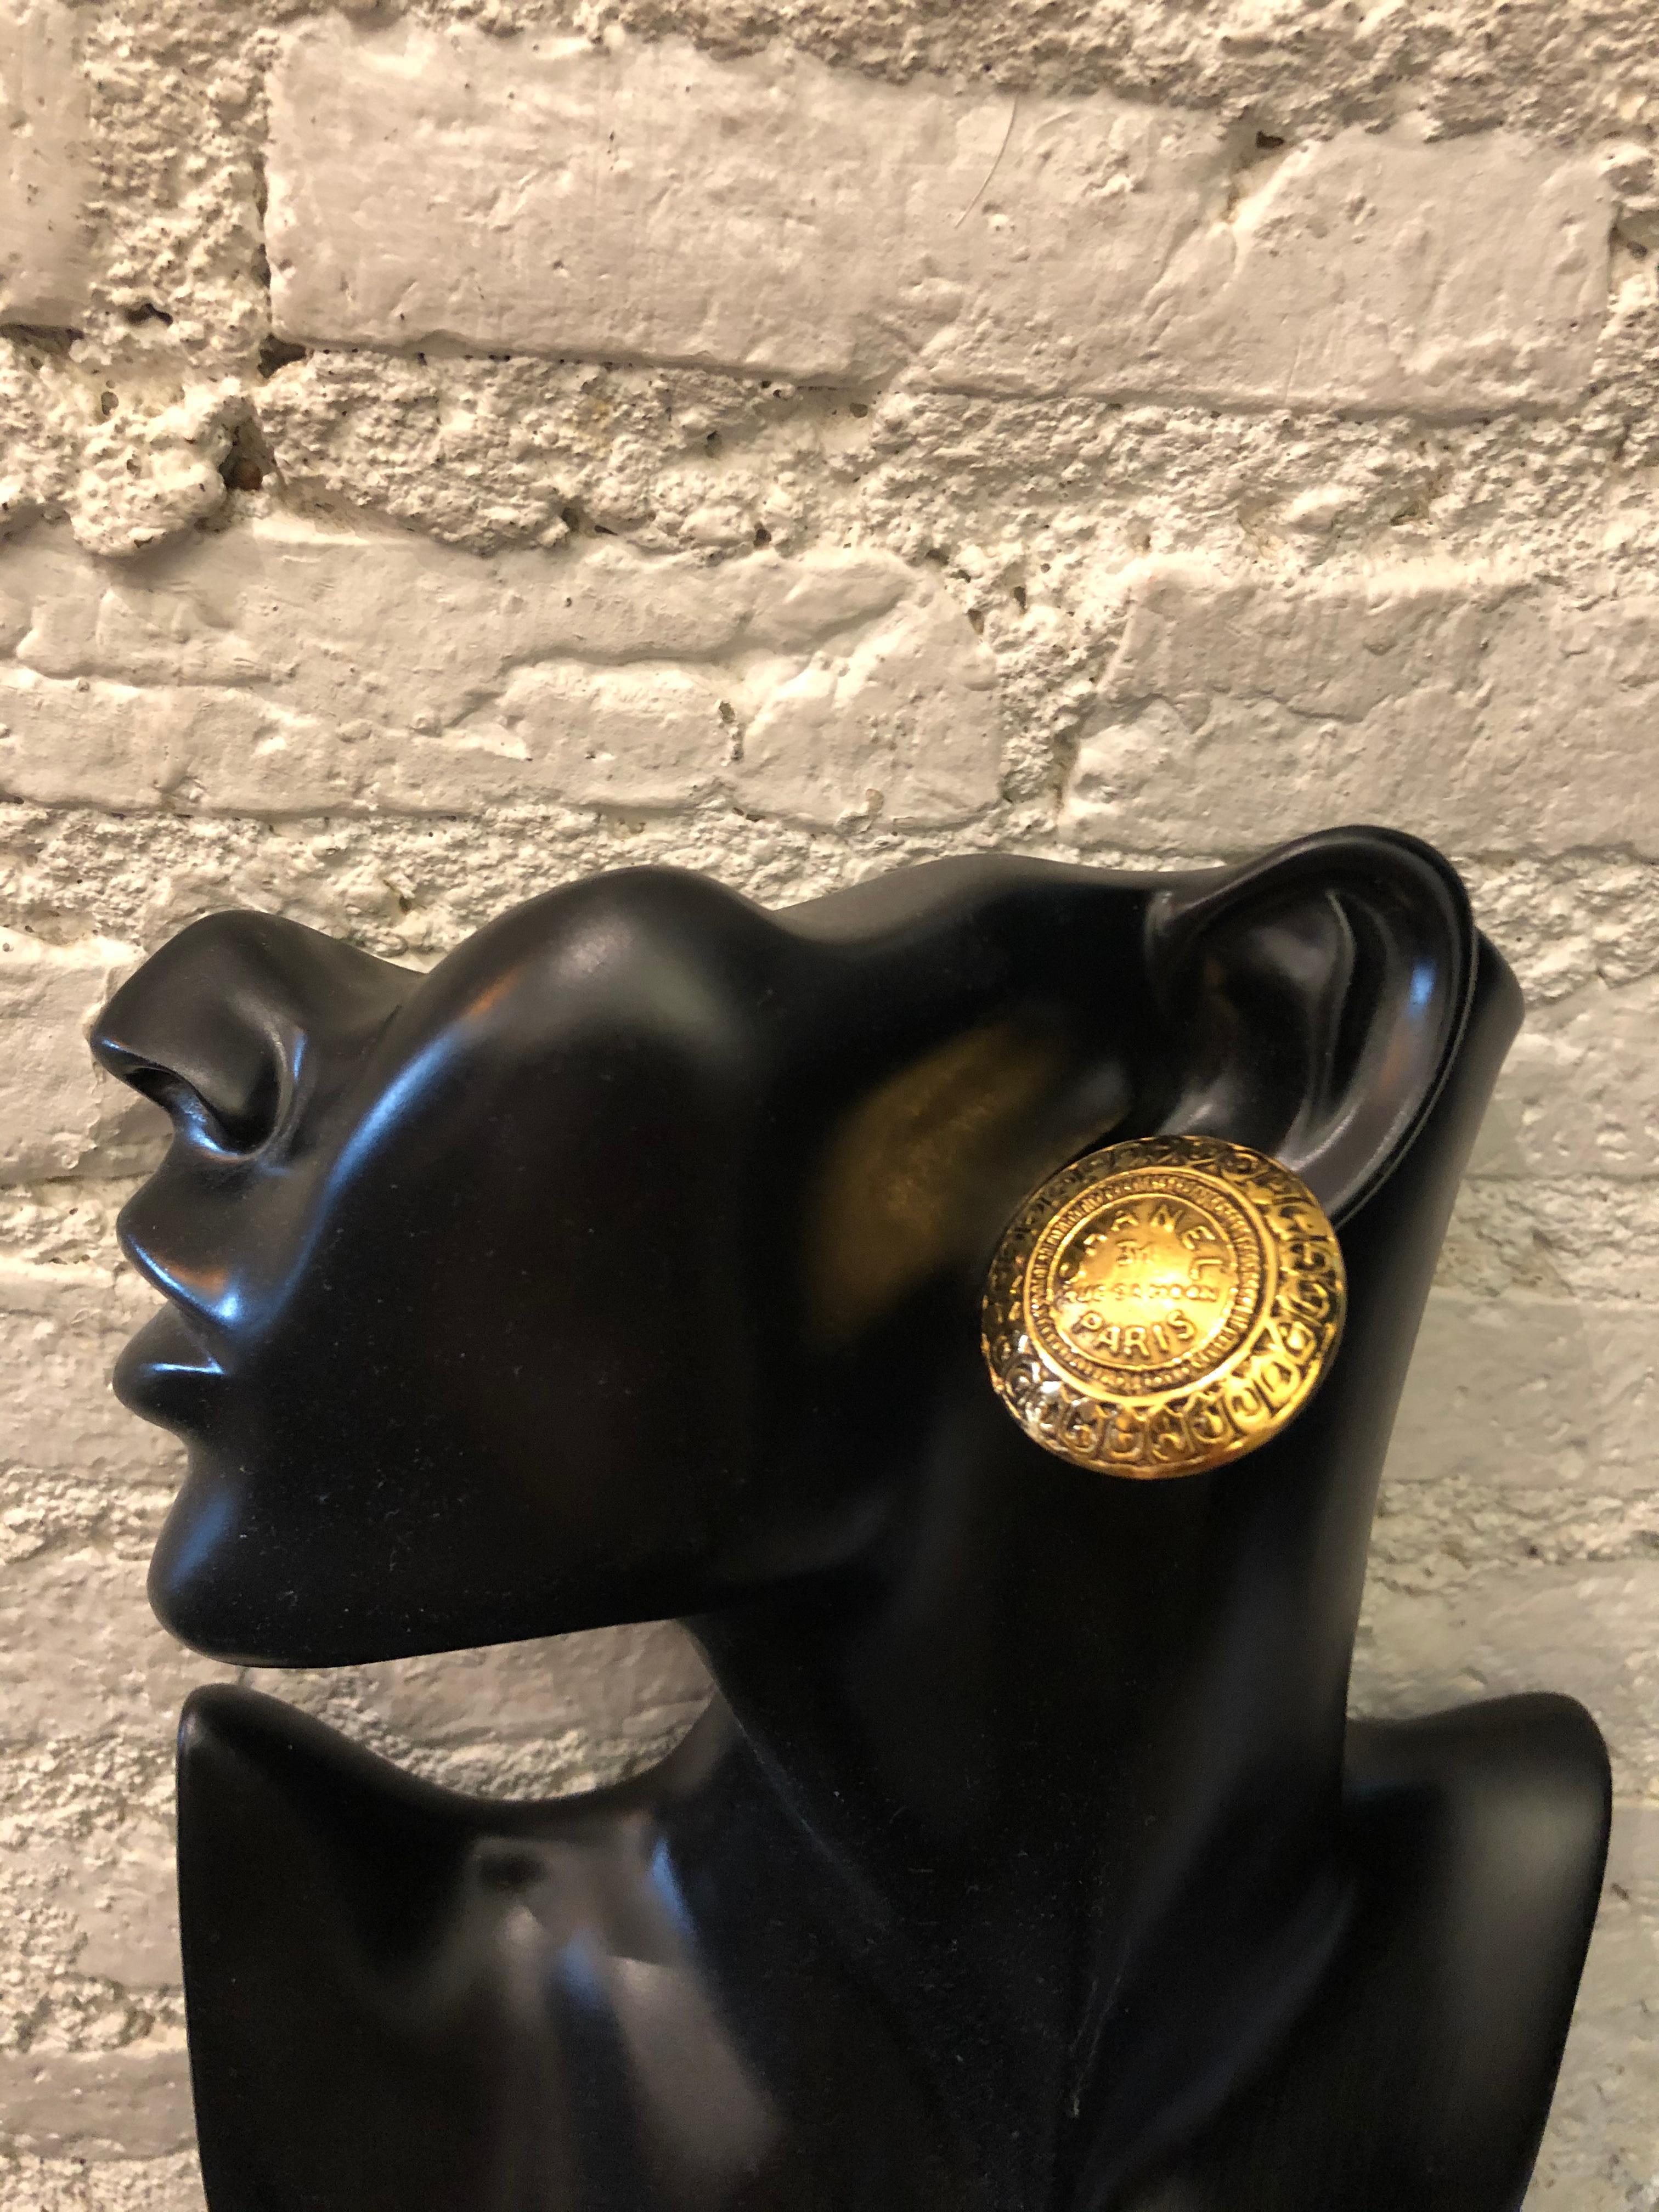 1980s CHANEL gold toned clip-on earrings featuring 31 Rue Cambon Paris medallion. Stamped CHANEL made in France. Diameter measures approximately 3.2 cm. Come with box. 

Condition - Minor scratches consistent with age and normal use.